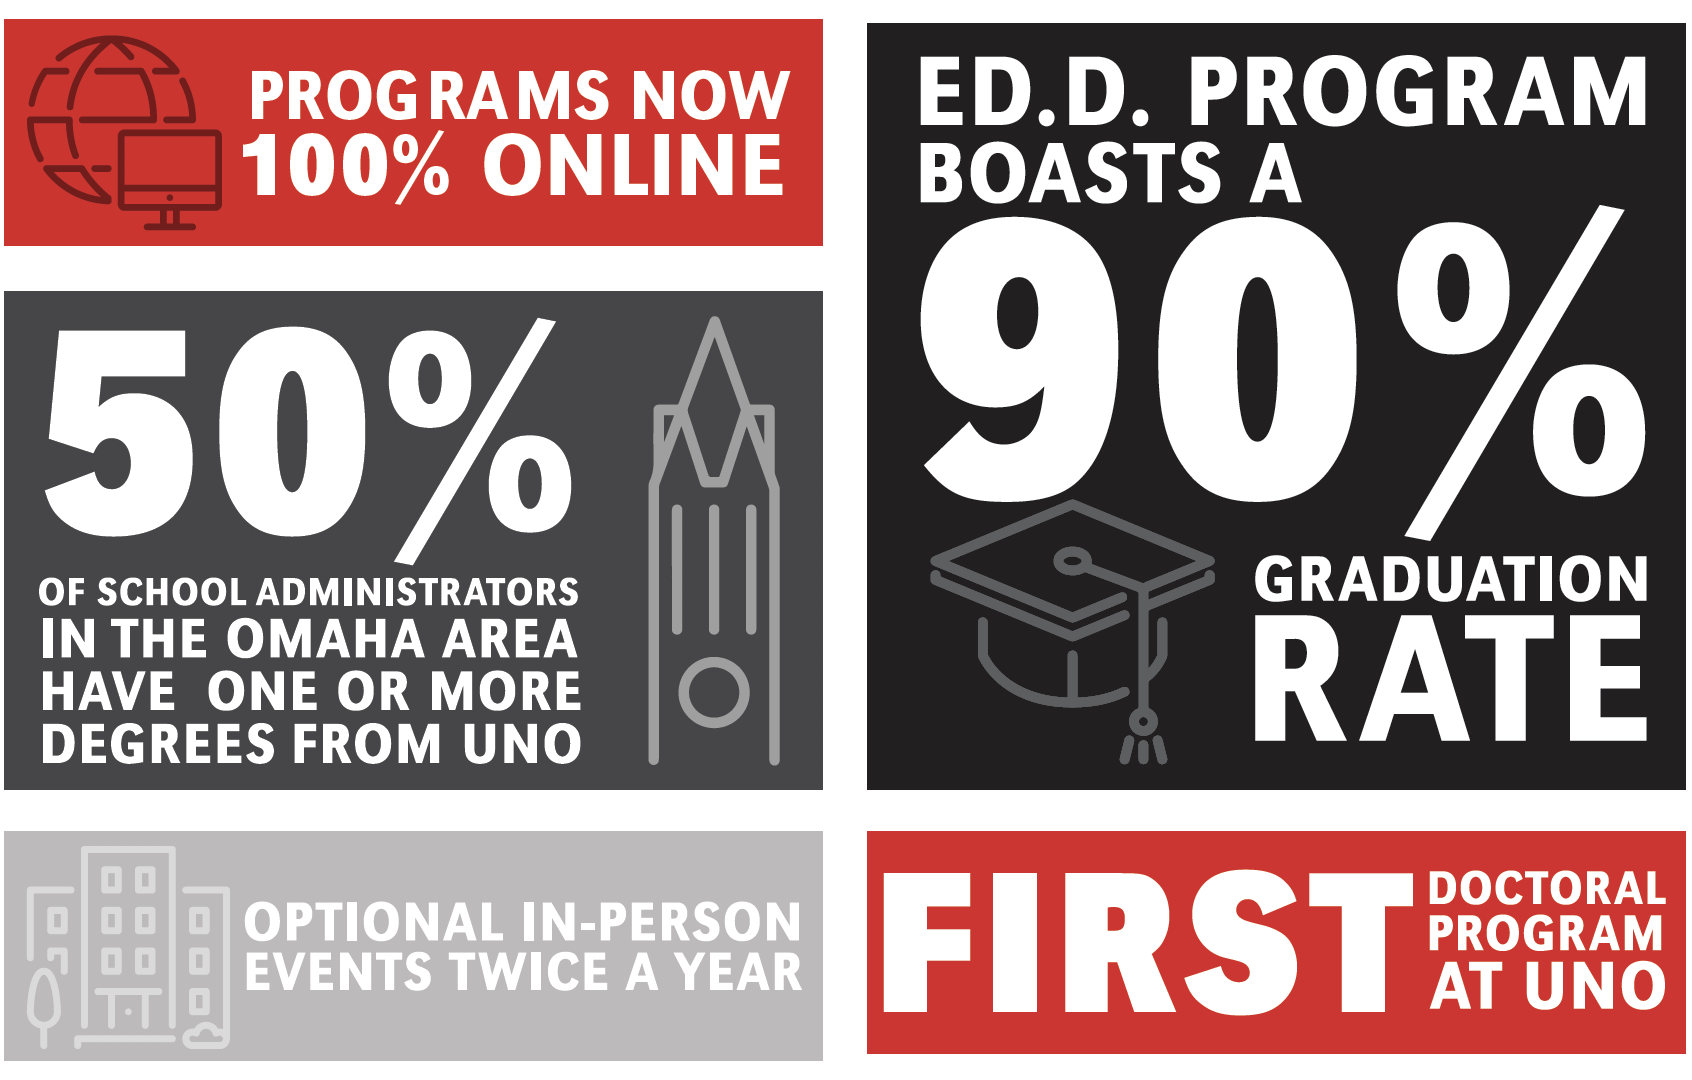 Educational Leadership programs are now fully online